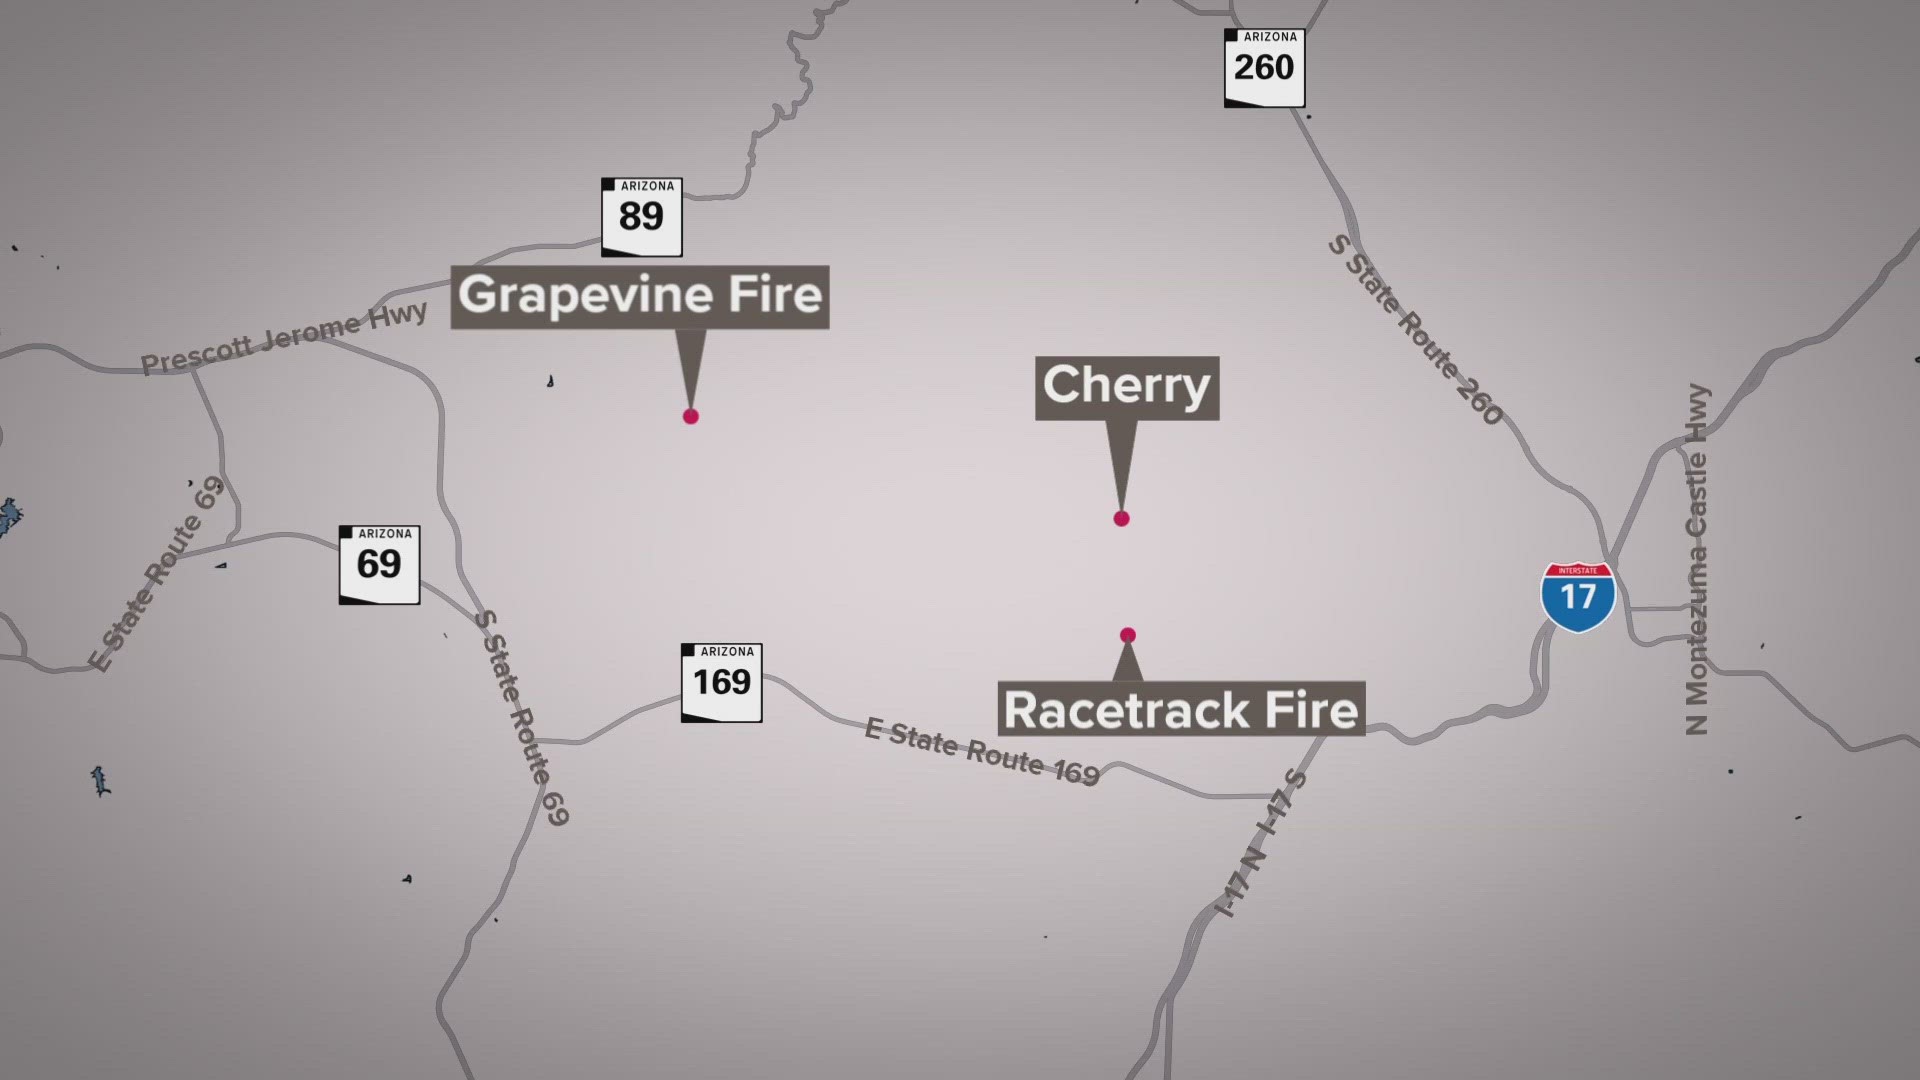 As of Tuesday, the Grapevine Fire had burned about 500 acres and was 0% contained.